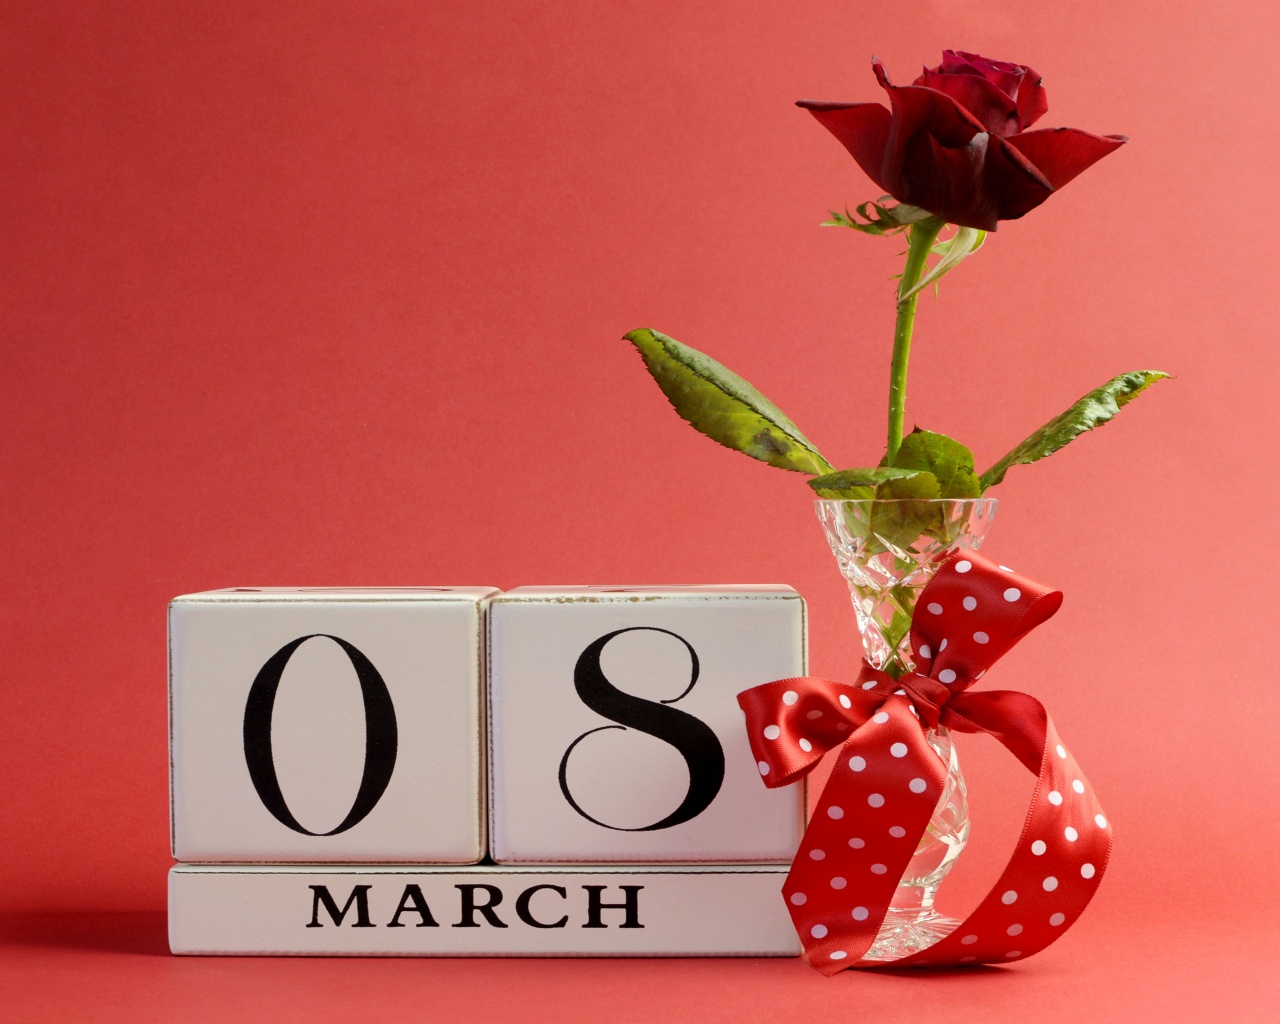 March 8 Roses Holidays